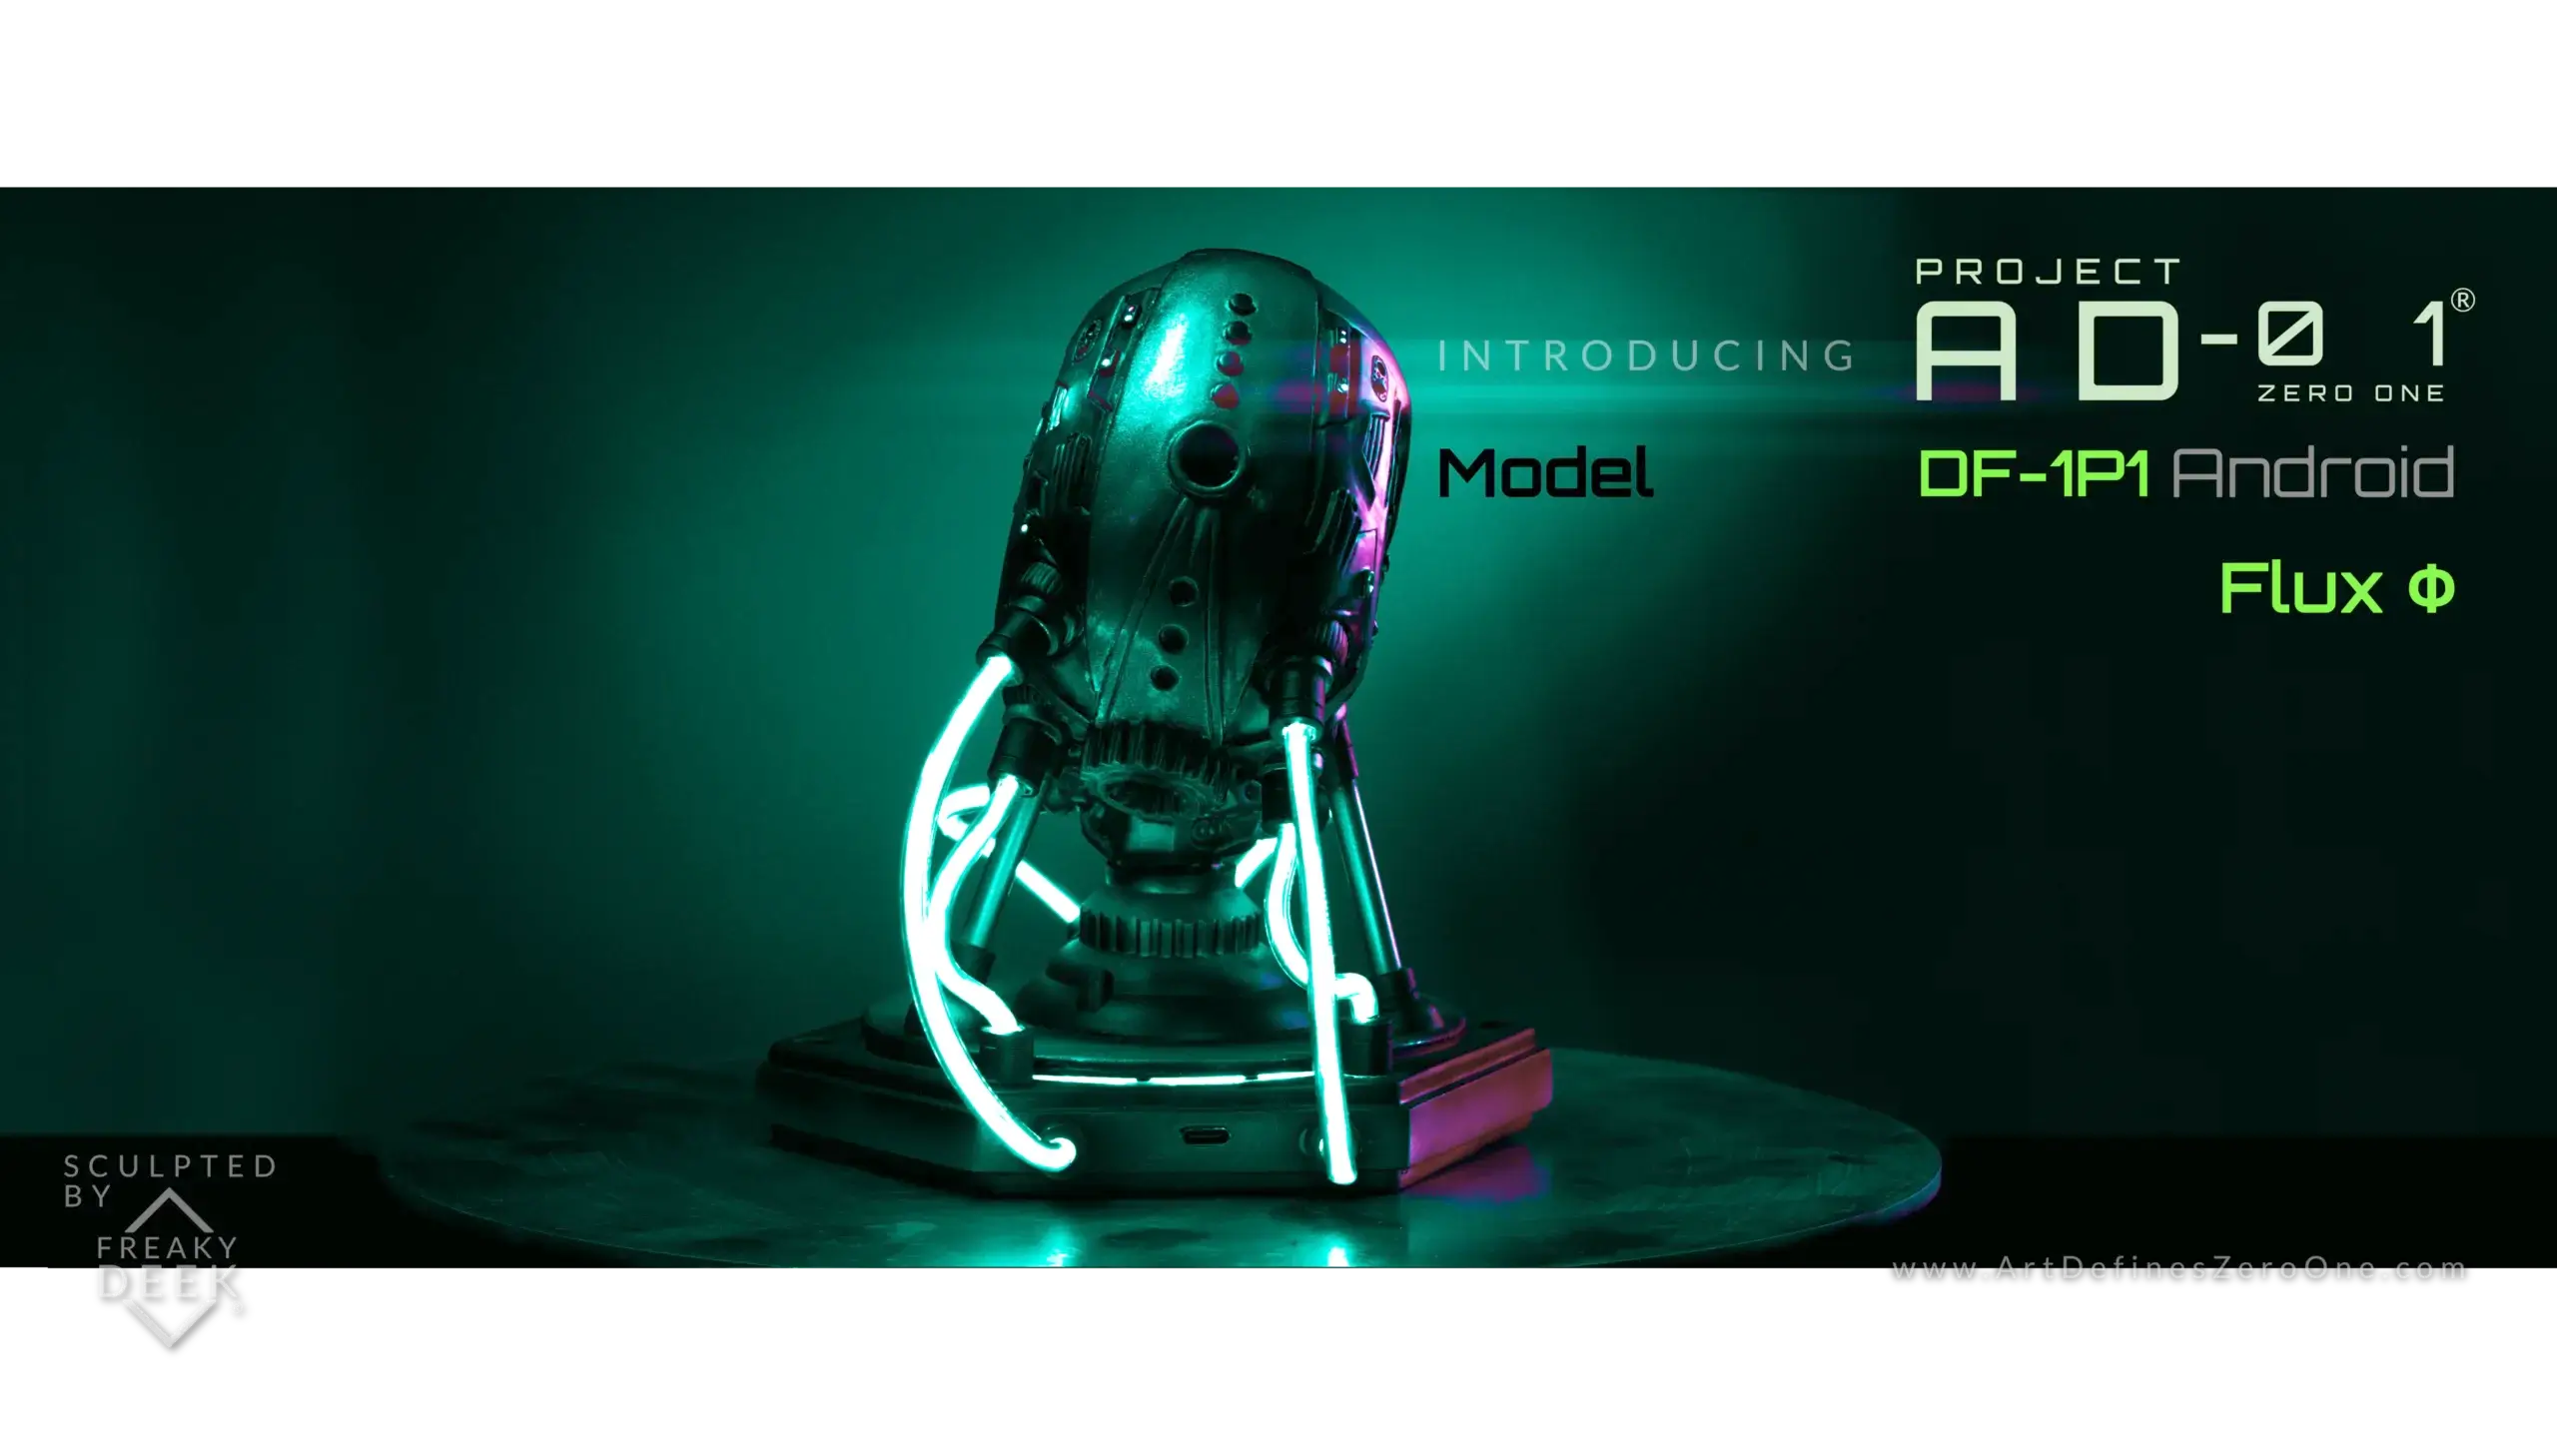 Project AD-01 handmade android sculpture Flux with green LED light back view